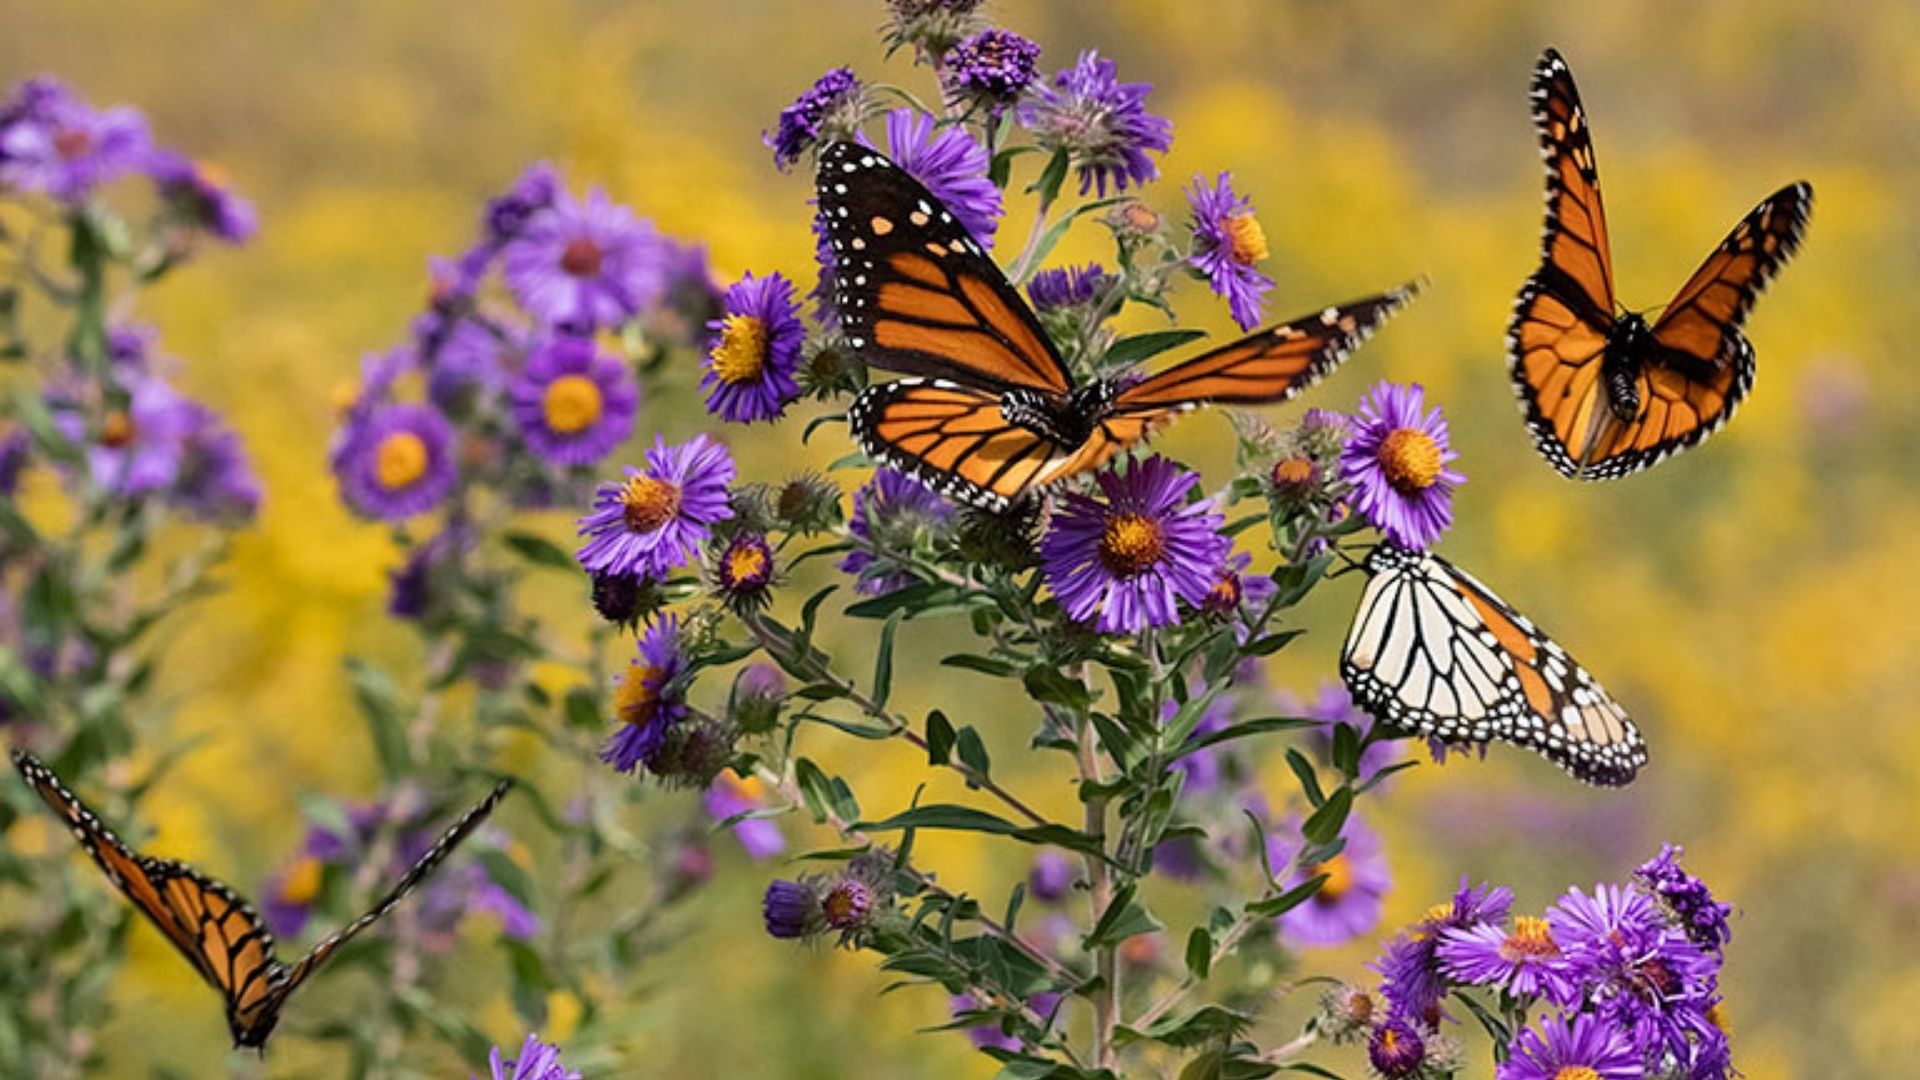 Many orange and black monarch butterflies surrounding an aster plant with bright purple flowers